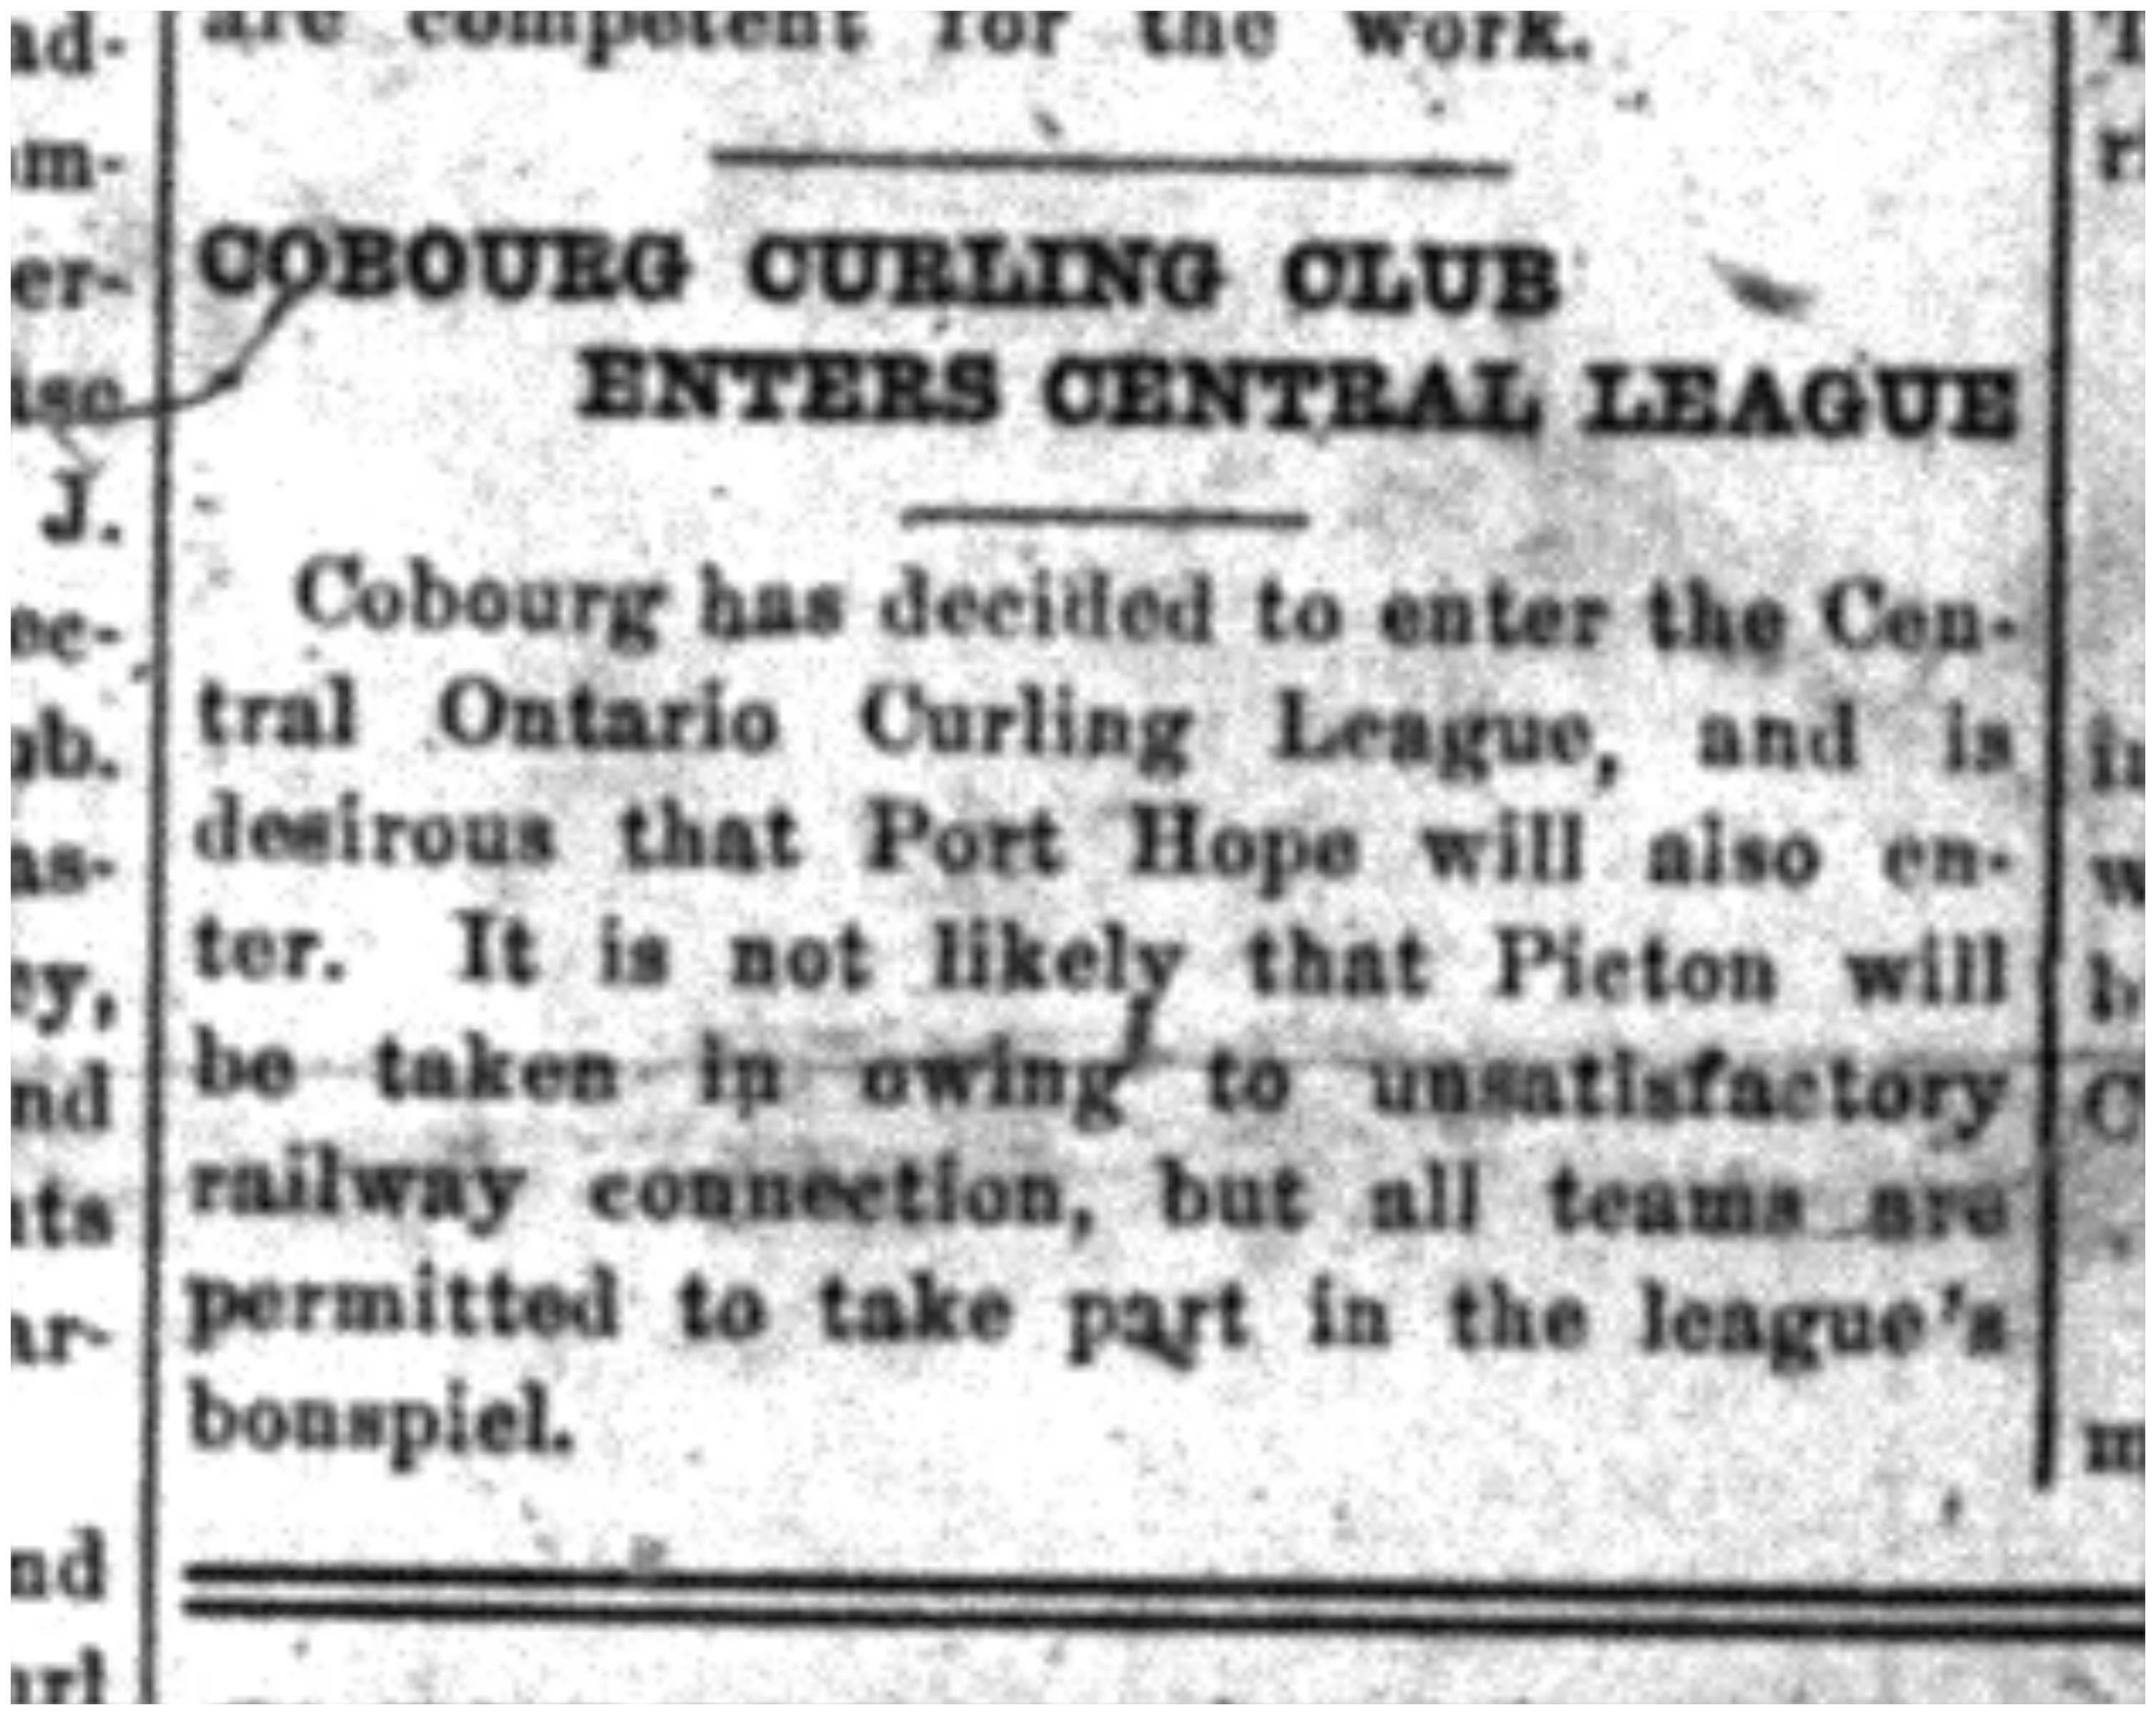 1919-12-18 Curling -Cobourg in Central League